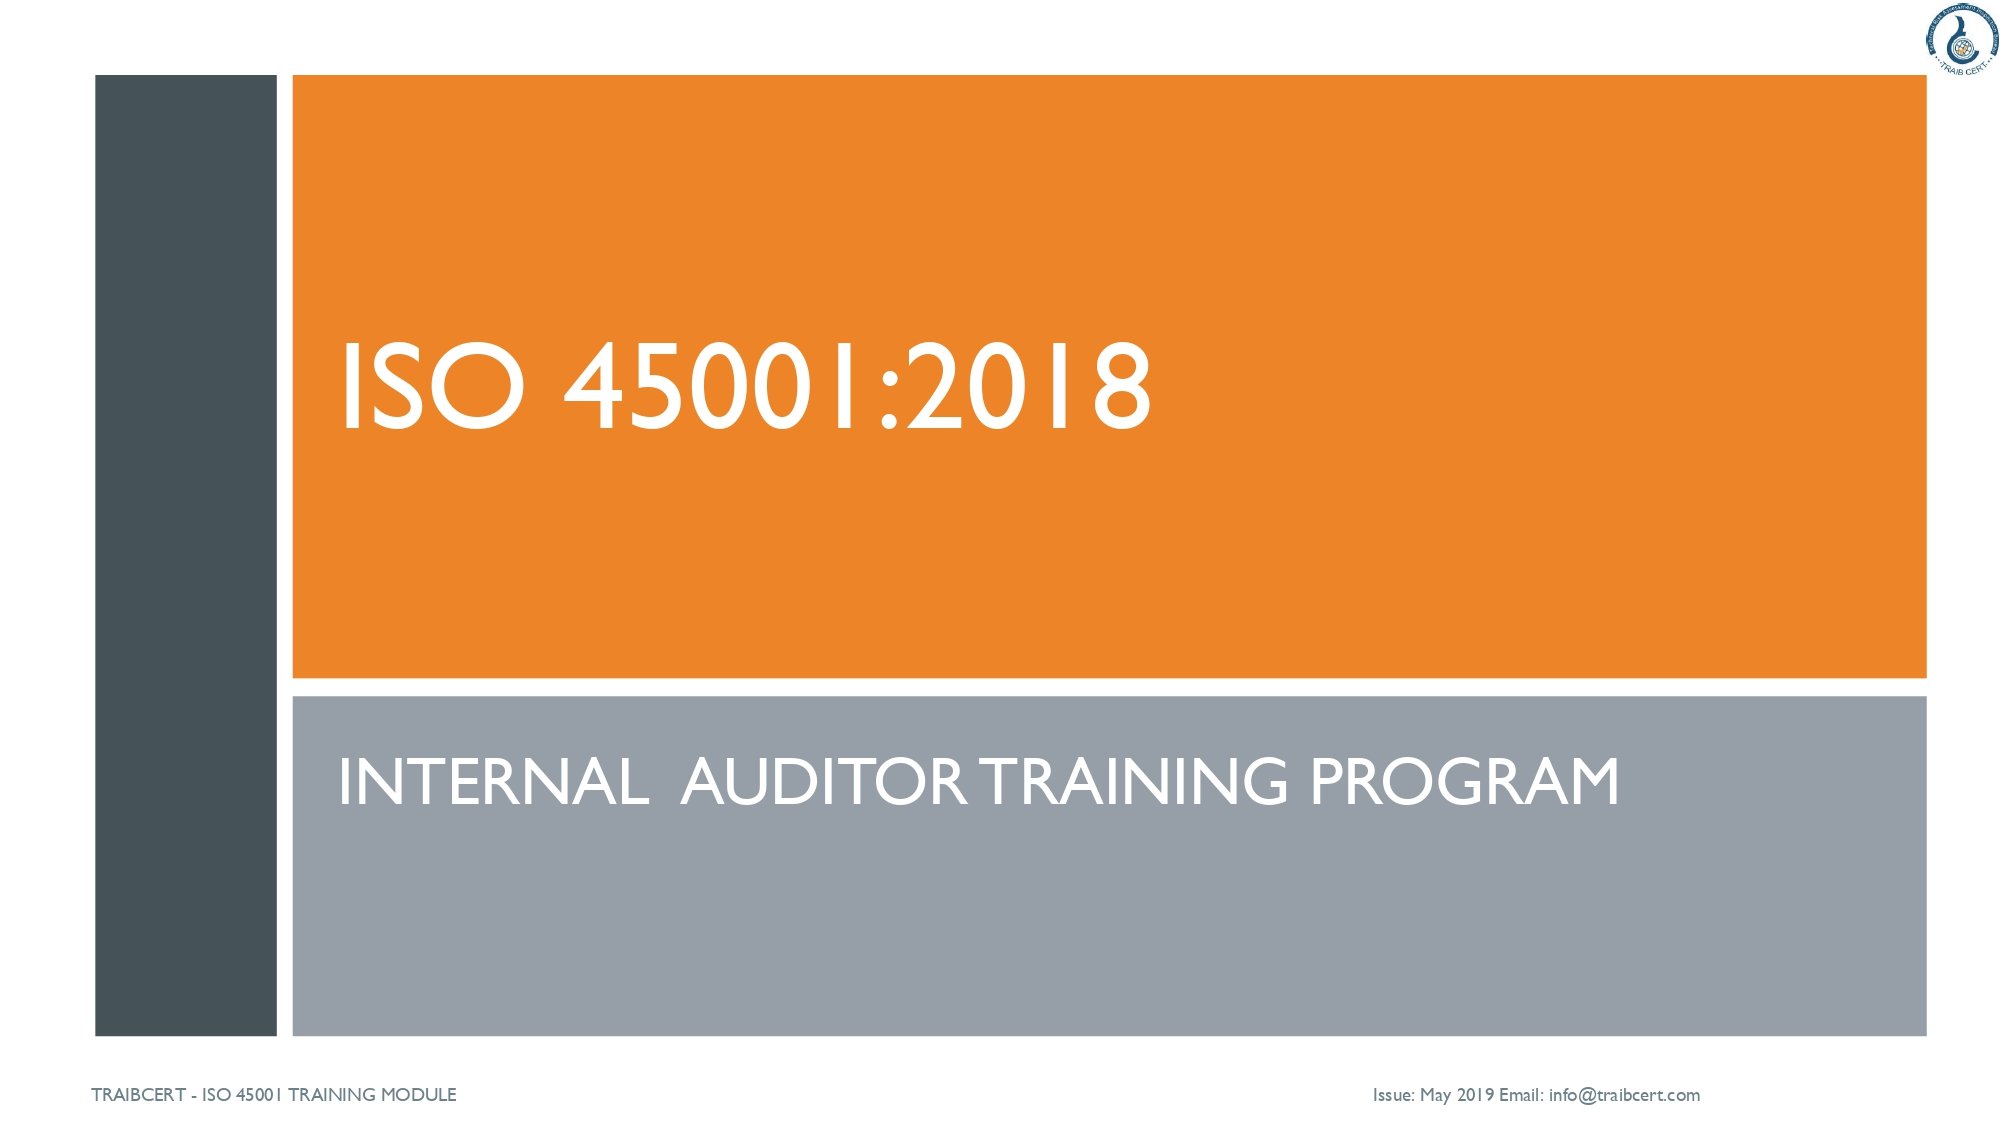 ISO 45001 :2018 internal Auditor Training course